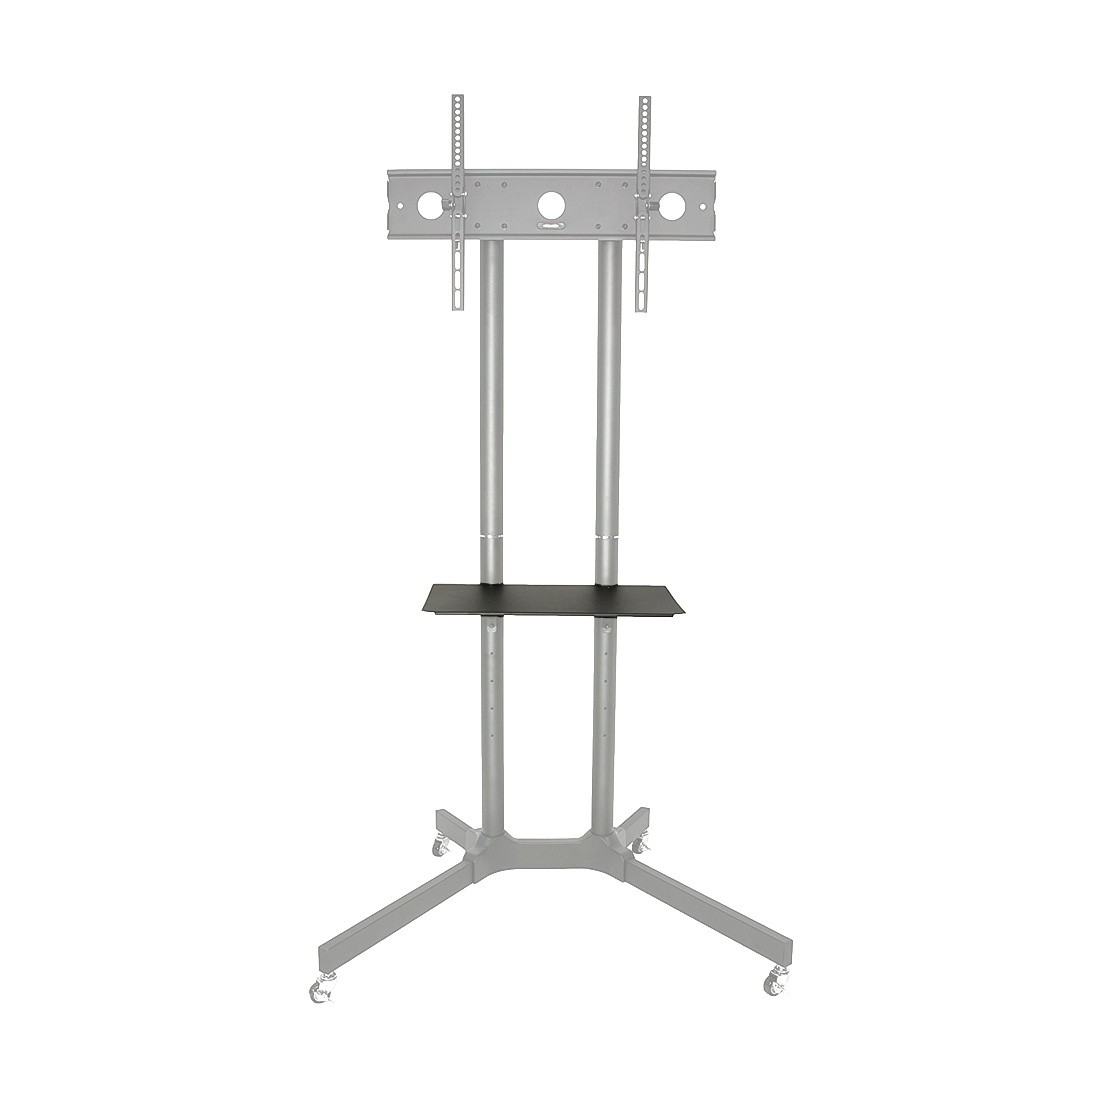 LED Monitor Floor Stand Shelf - up to 80"